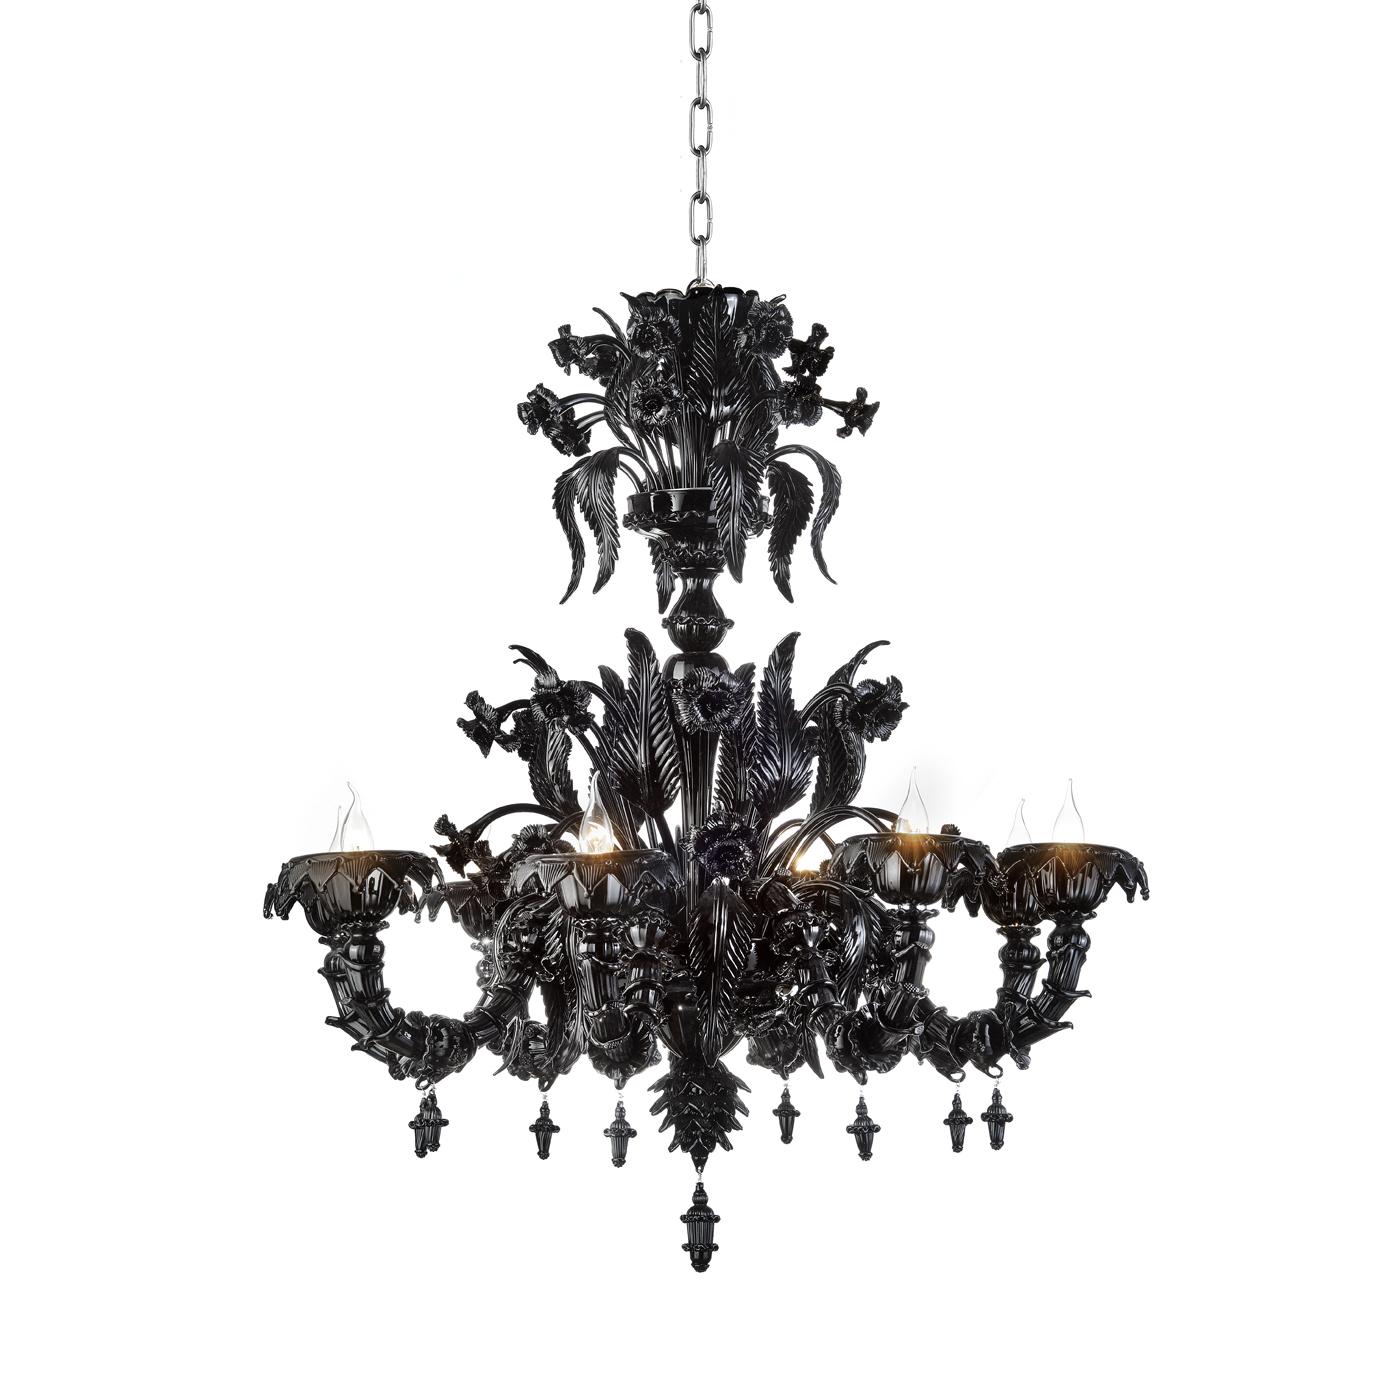 A modern take on the traditional Venetian chandelier, this exquisite piece will make a statement in any decor, creating a dramatic entrance or highlighting a dining room with elegance and drama. Pure, mouth-blown Venetian glass in black is